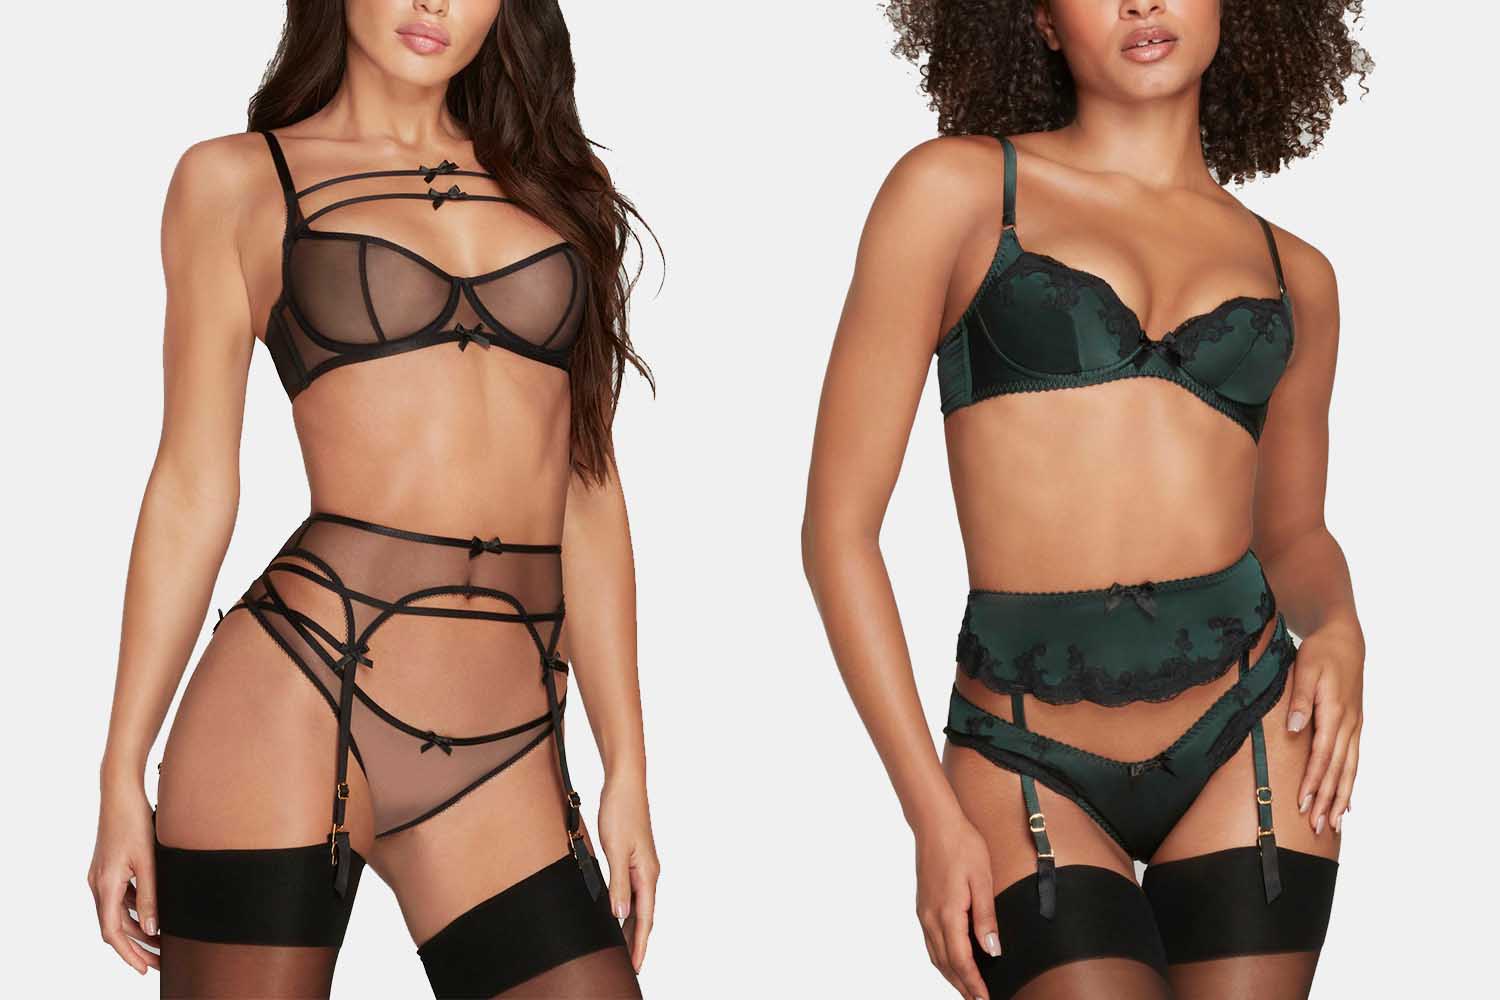 The Lingerie Addict: Helping You Find The Lingerie of Your Dreams!